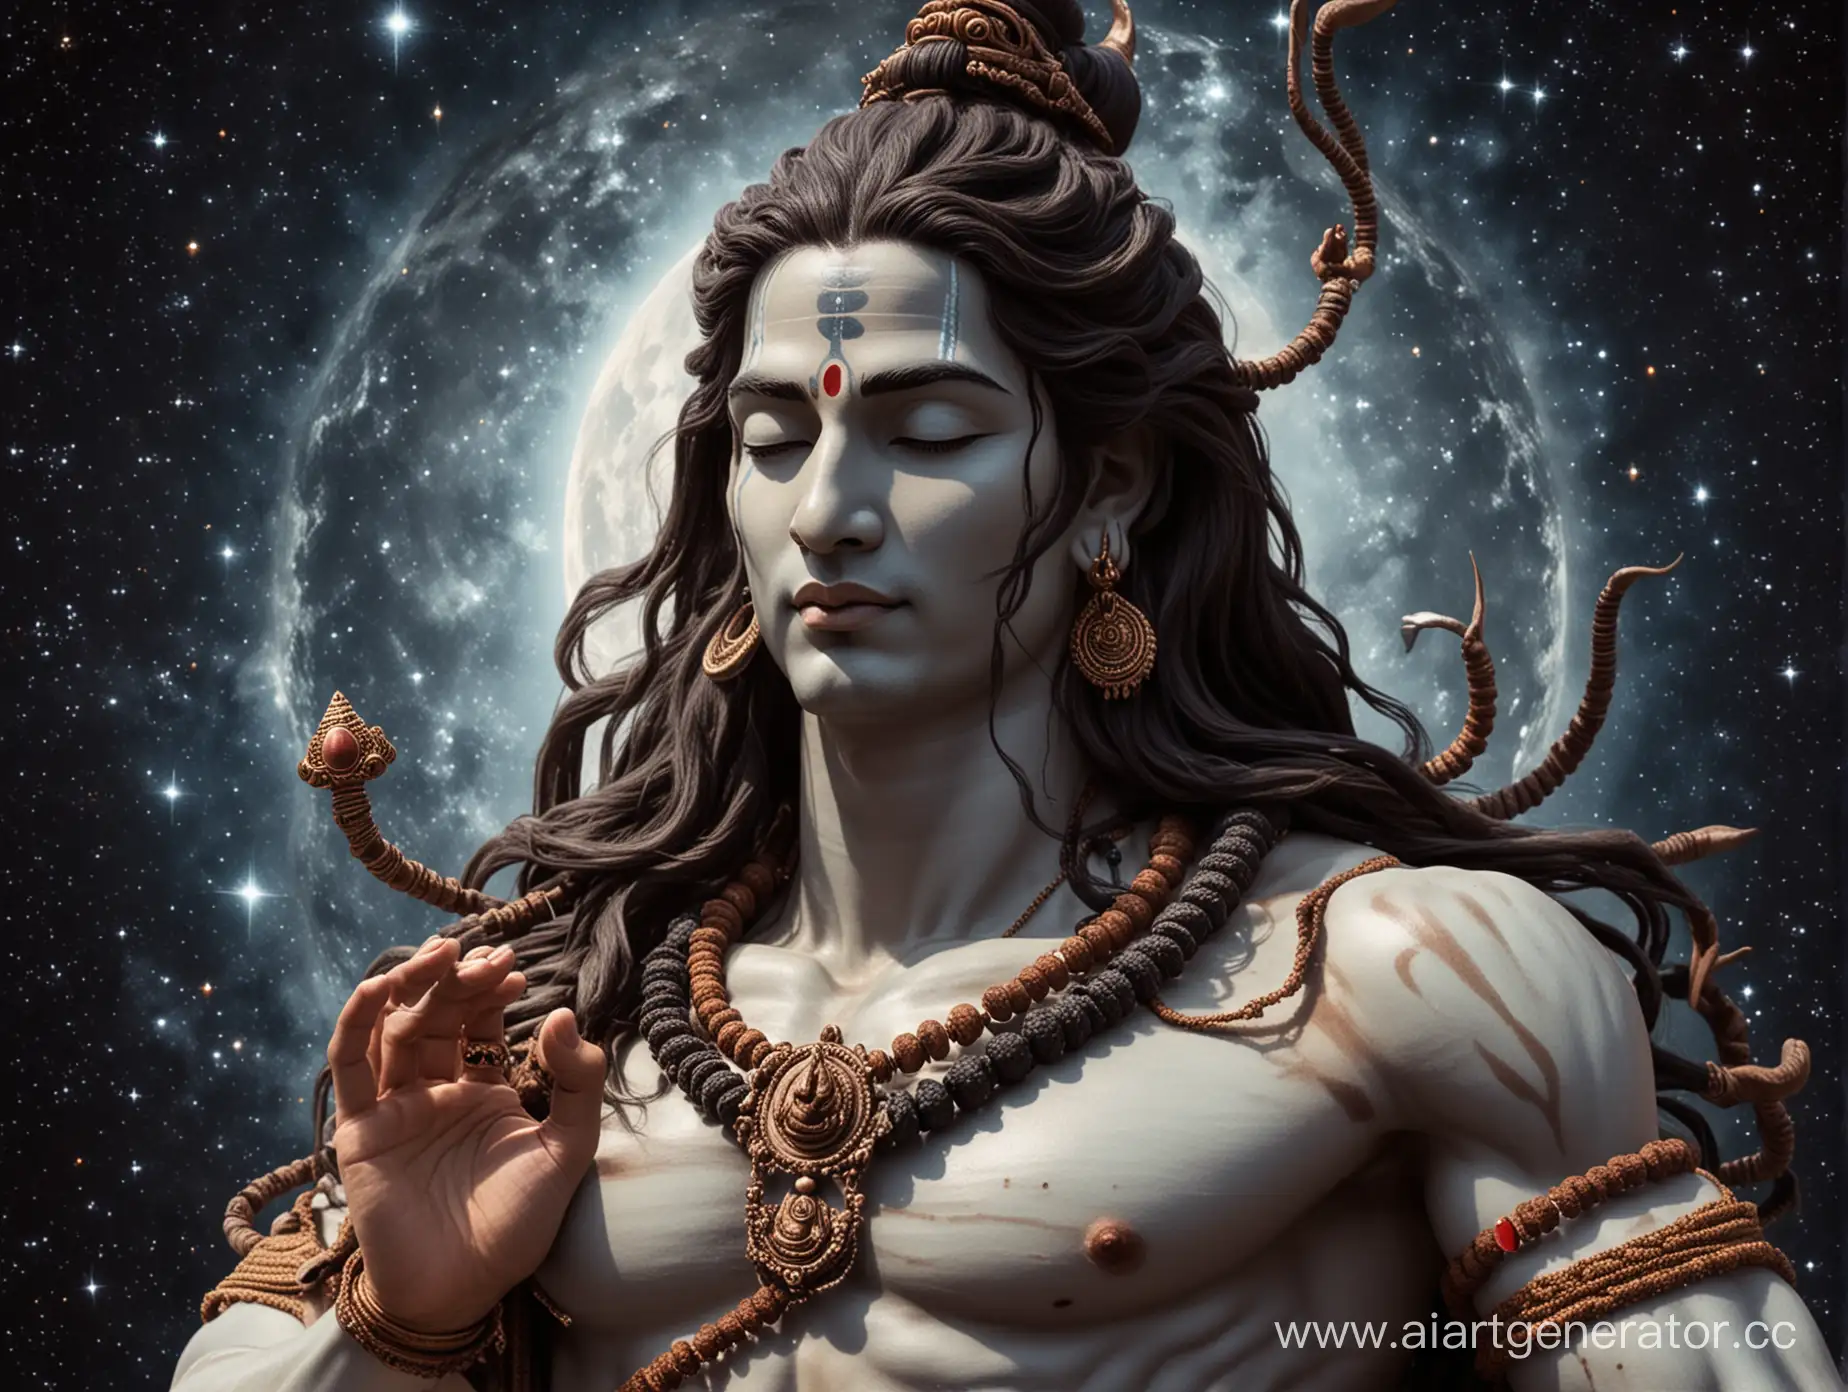 Lord-Shiva-Meditating-in-Cosmic-Serenity-with-Rosary-and-Cobra